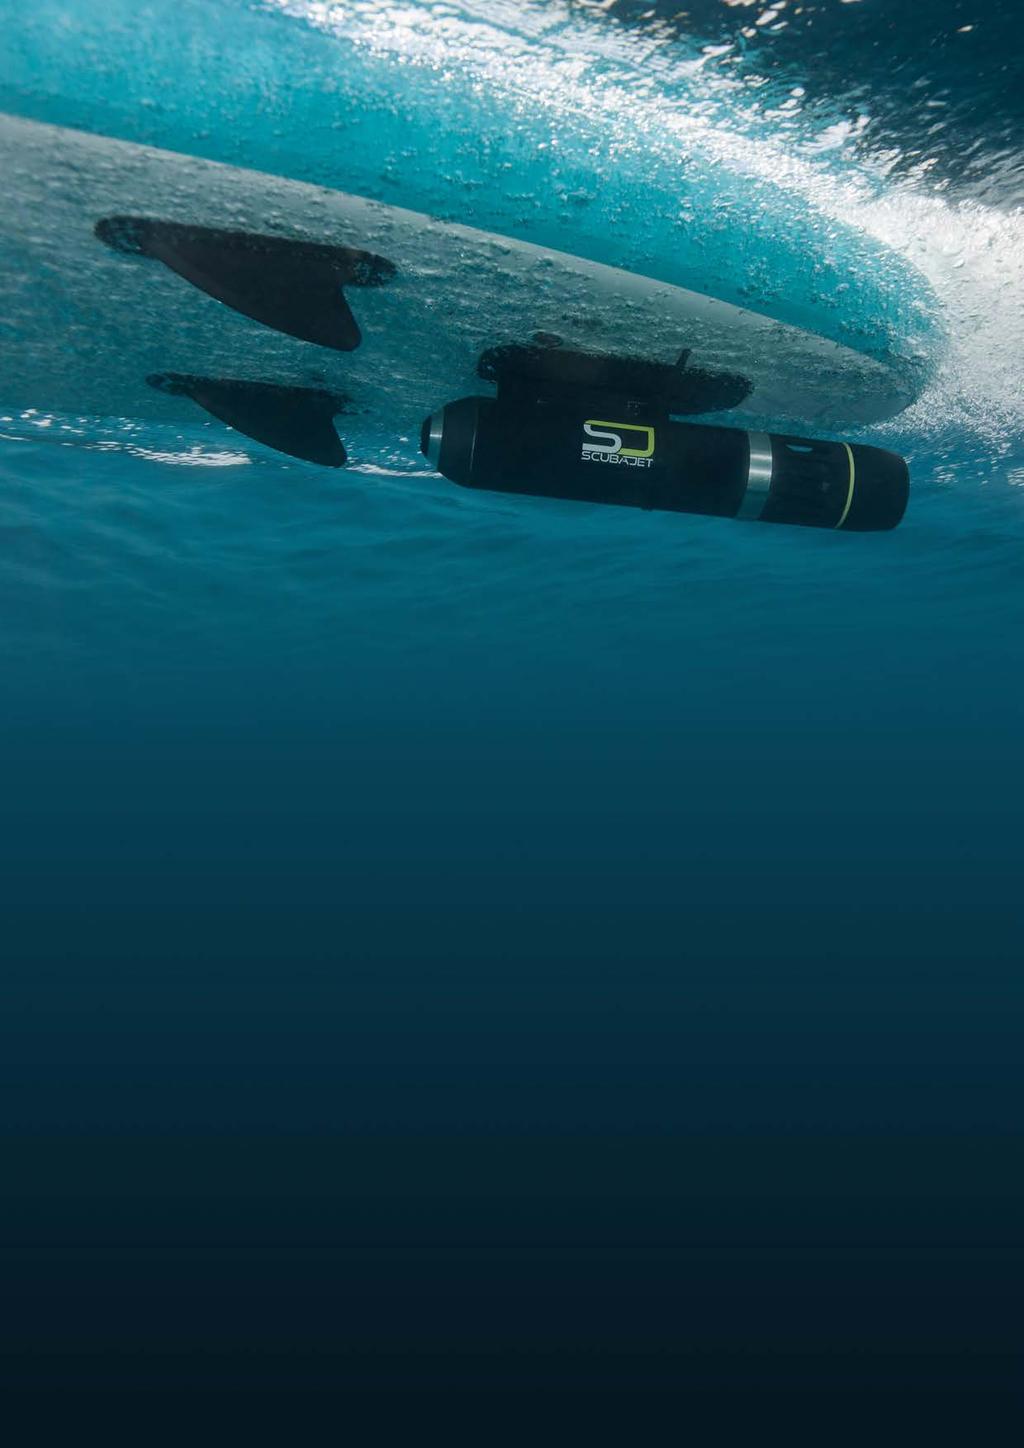 6. USING THE SCUBAJET ON YOUR SUP You are now able to extend your SUP board and enhance it with water jet power. With your SCUBAJET finbox adapter, you lift your SUP board onto the next level.